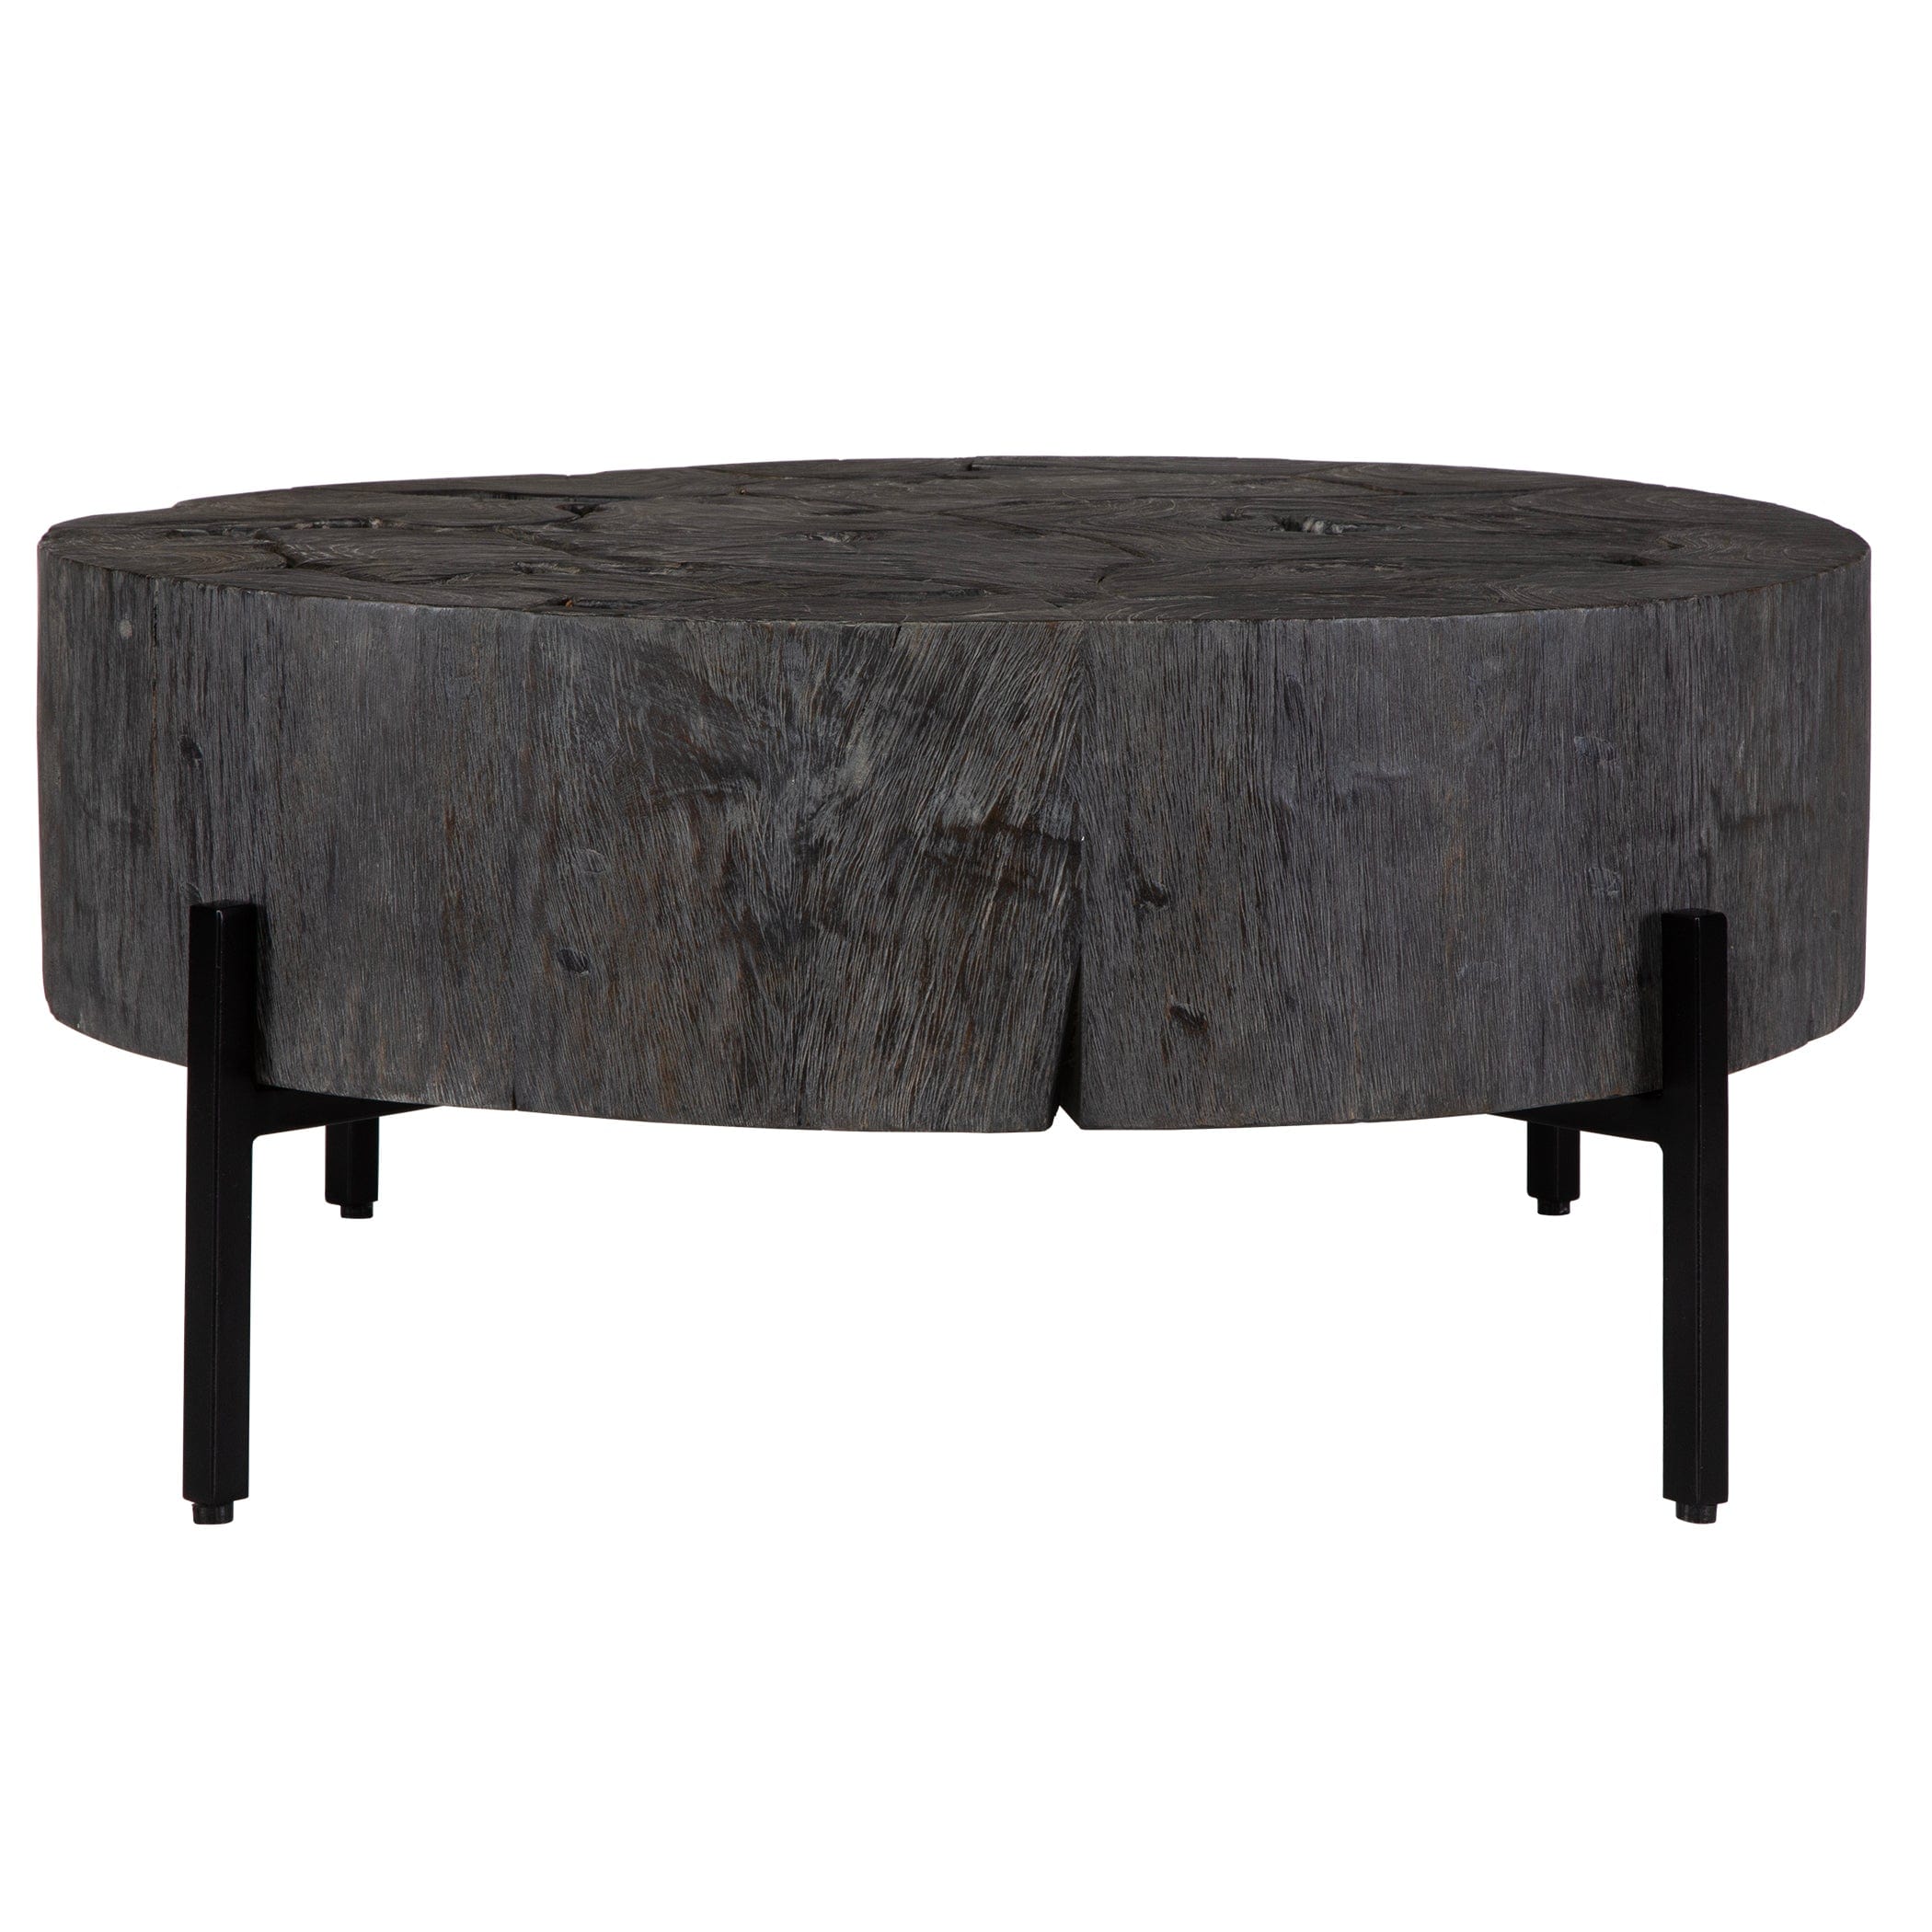 Adjoin Rustic Black Coffee Table Uttermost